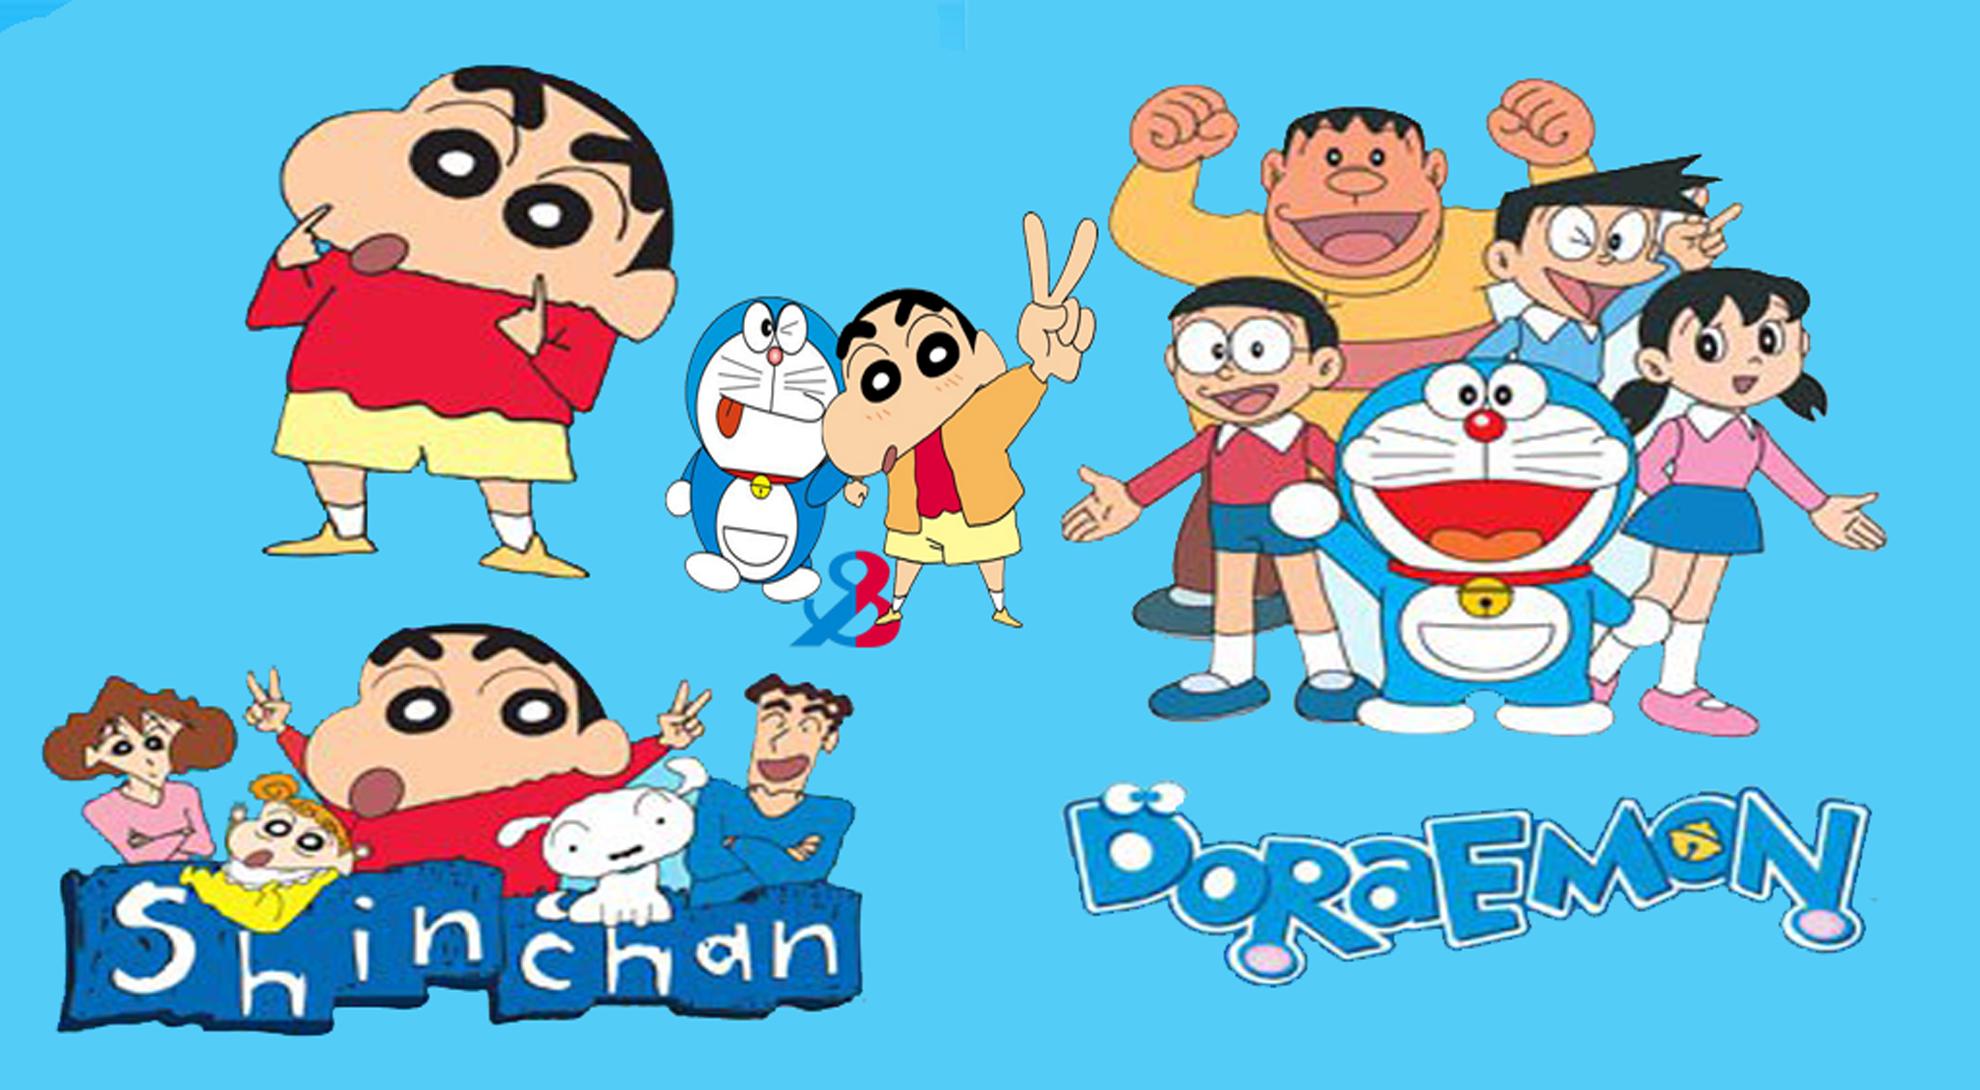 Shinchan and doraemon games for Android - APK Download